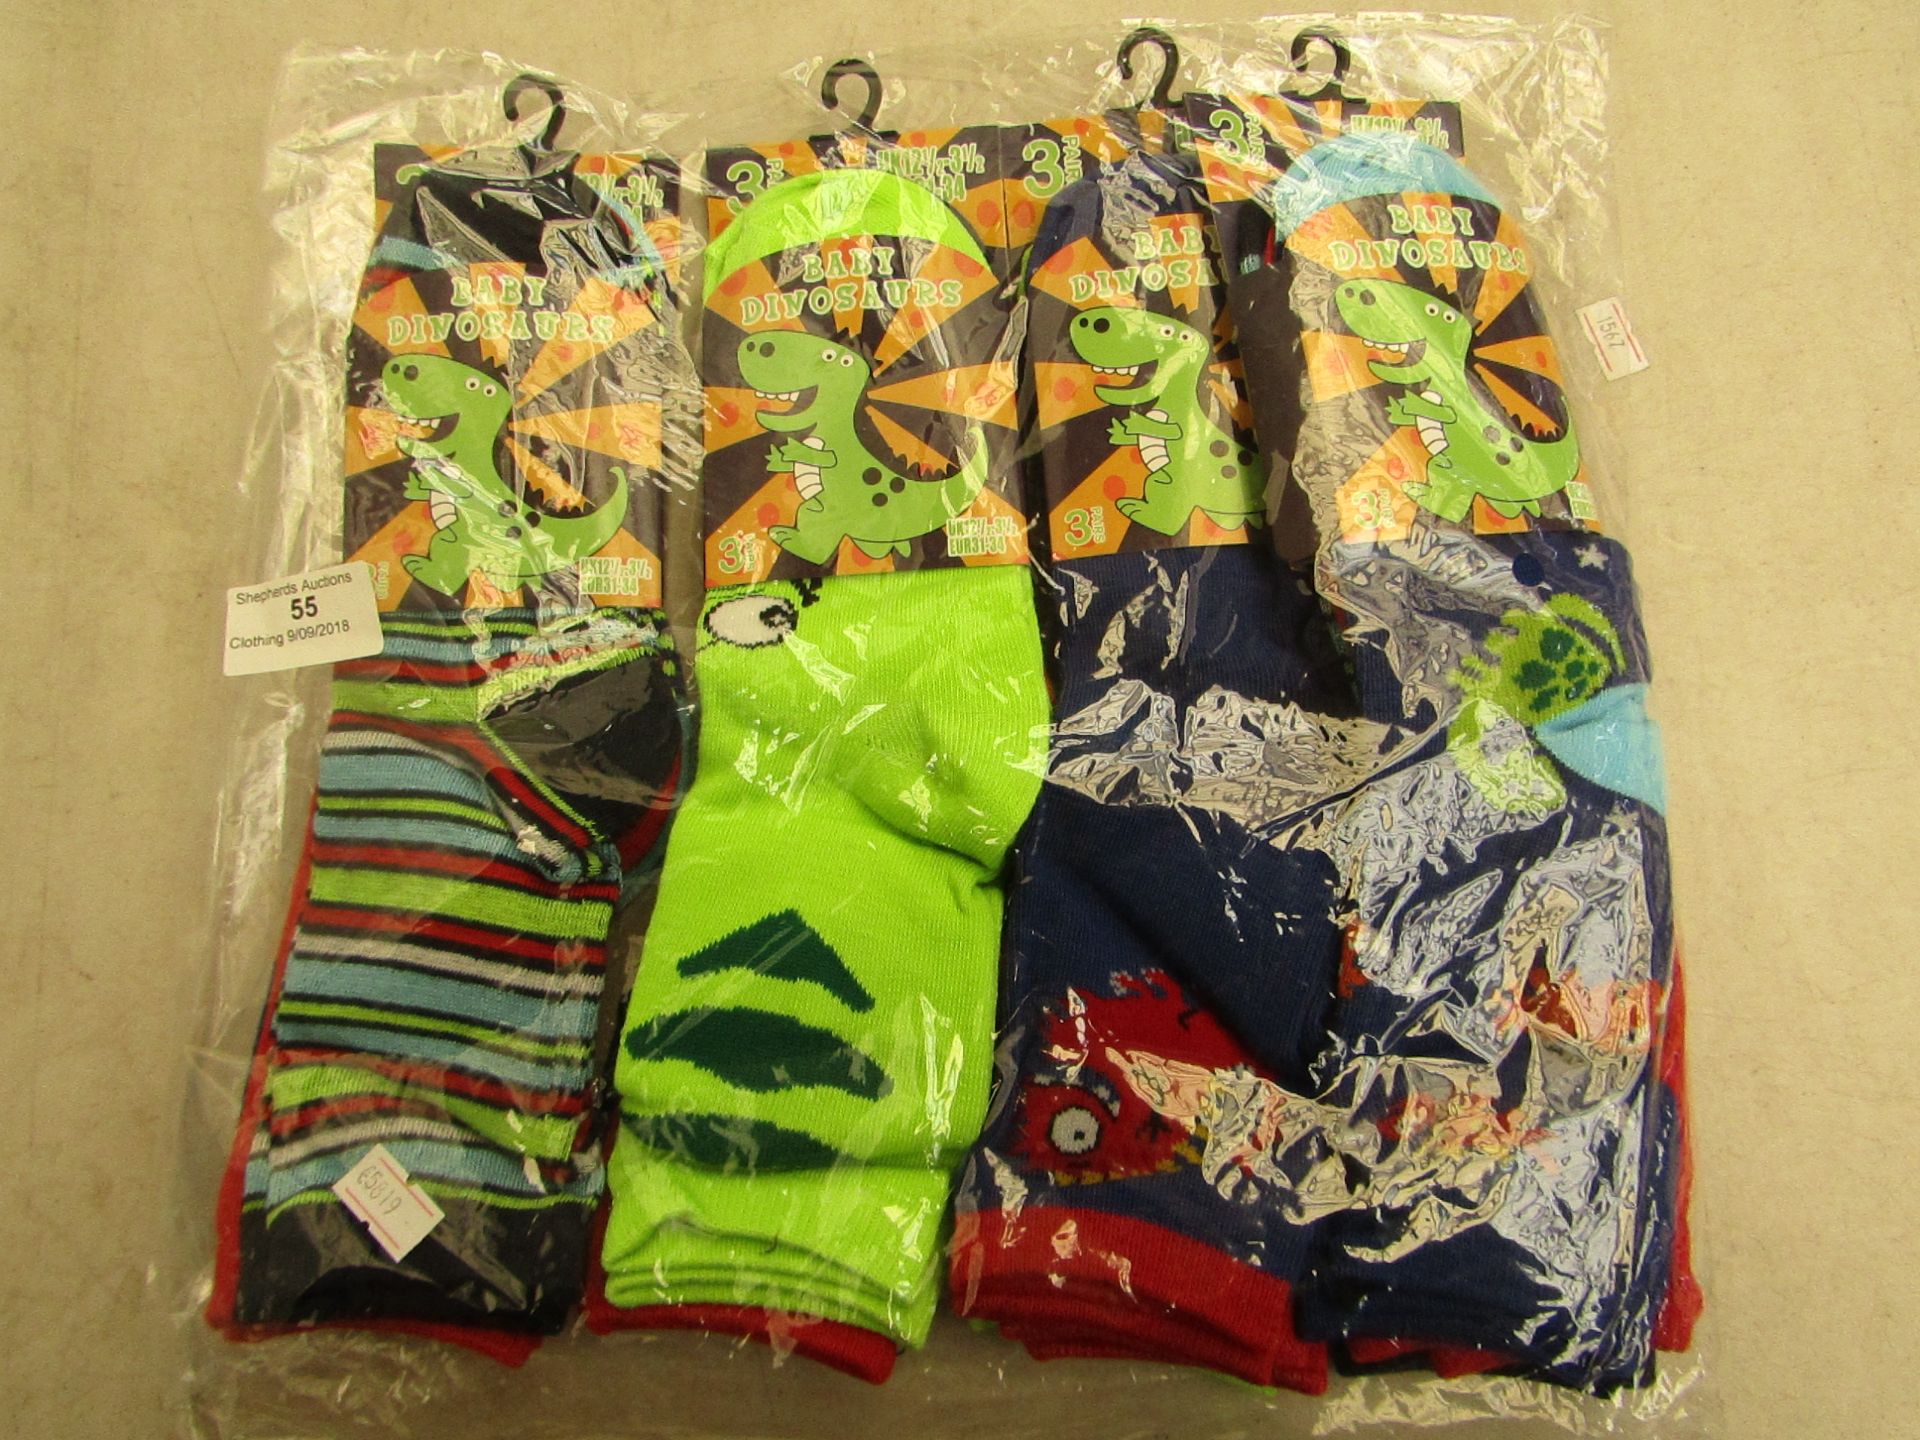 12 X Pairs of childrens socks baby dinosaurs themed size 12 1/2 -3 1/2 all new in packaging